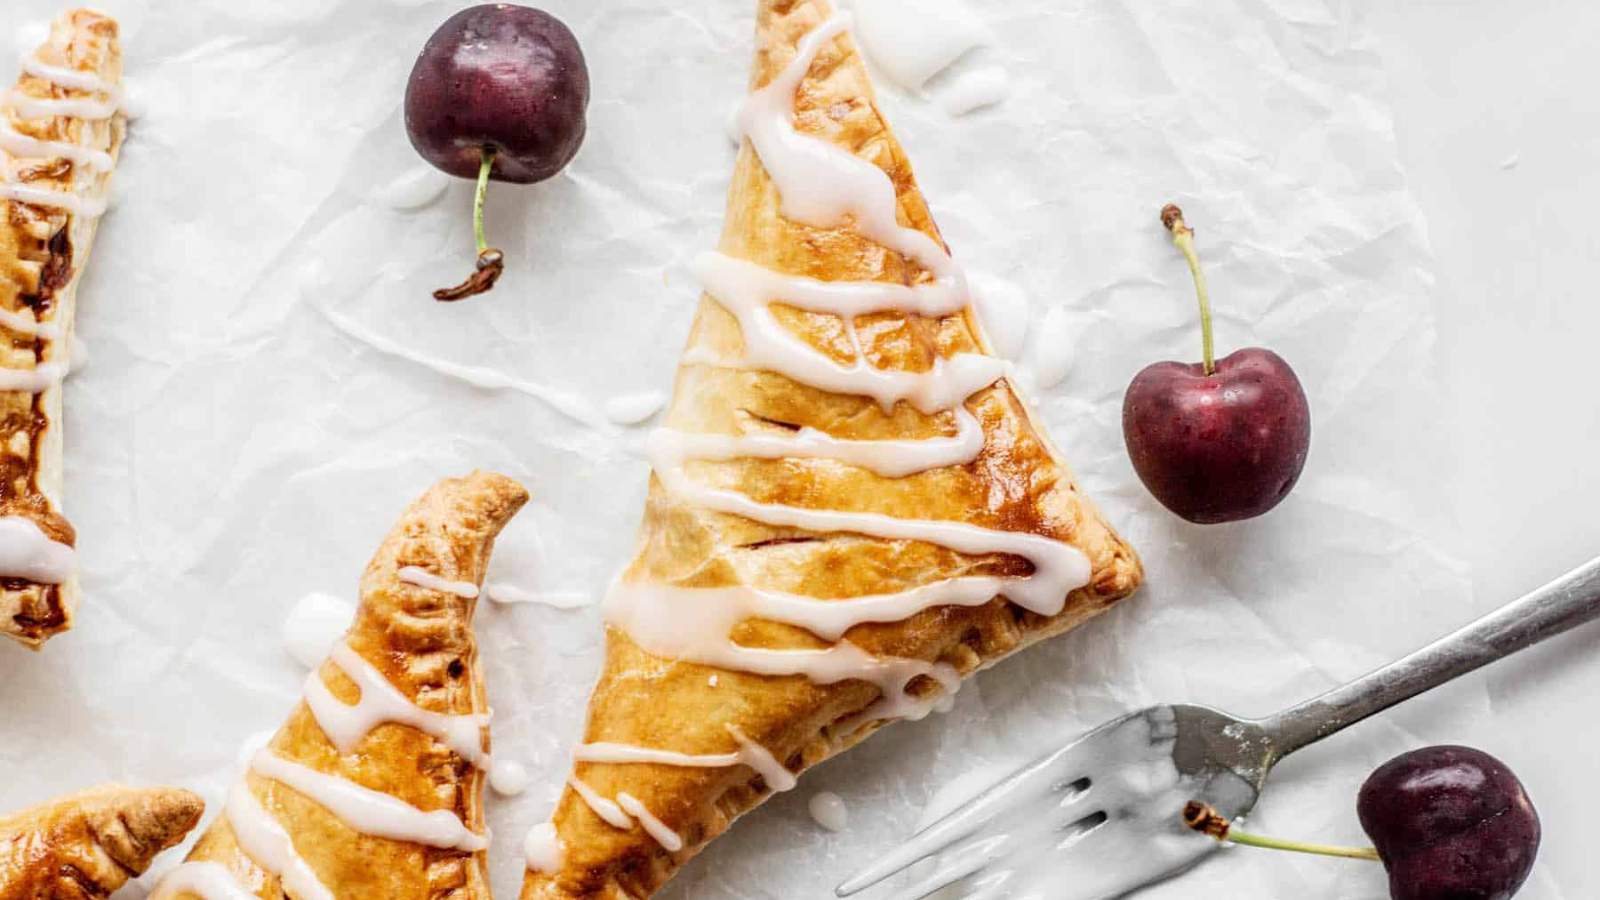 Air Fryer Cherry Turnovers recipe by Air Fry Cook.
